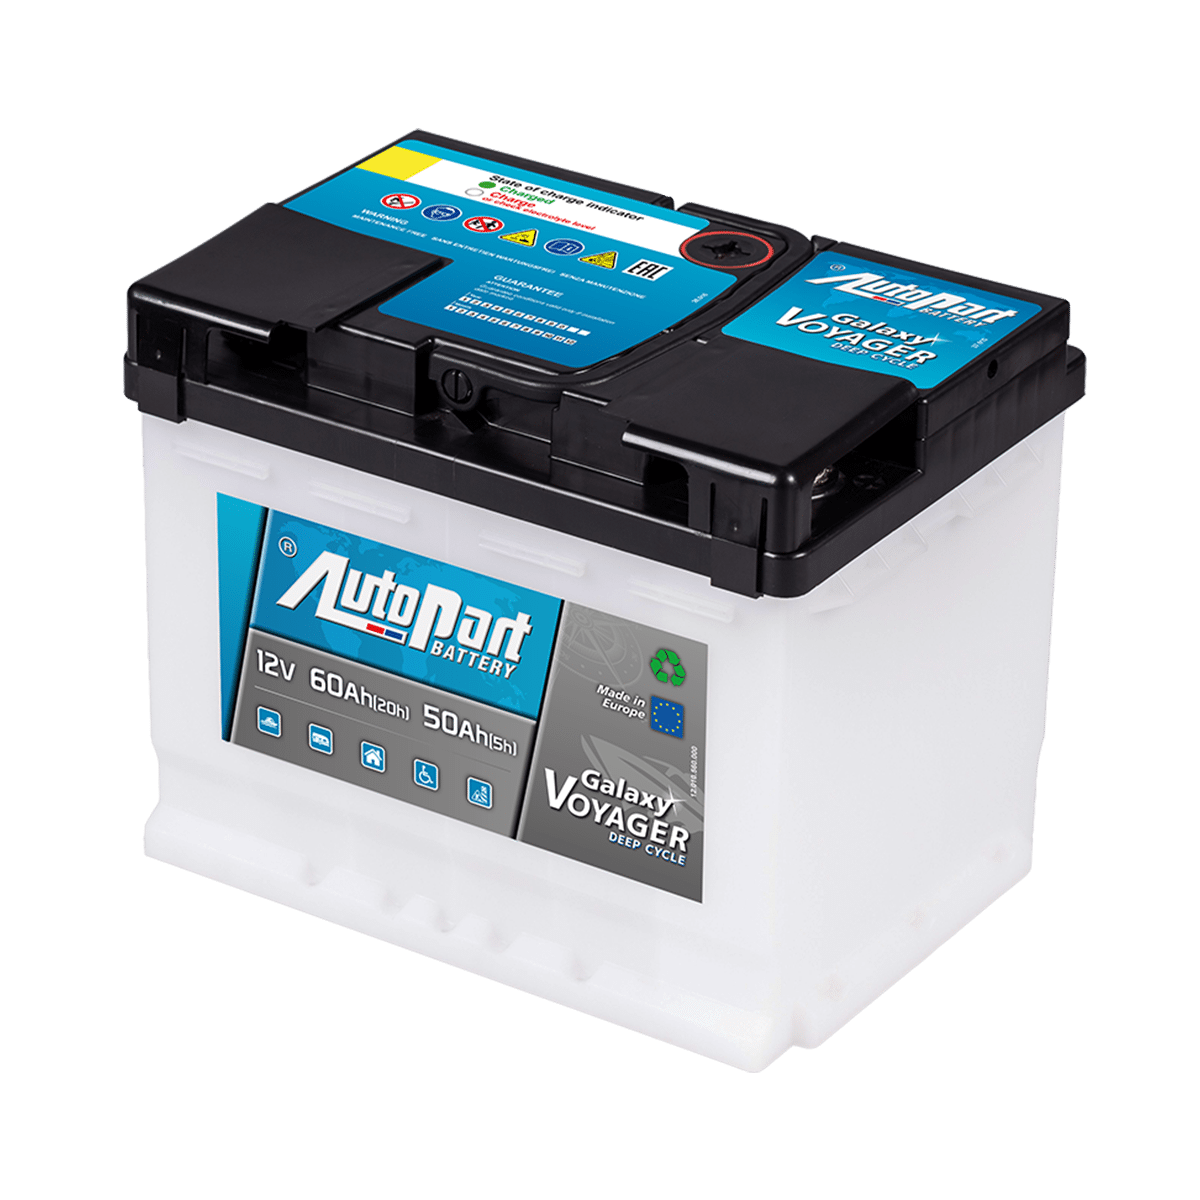 autopart battery galaxy voyager